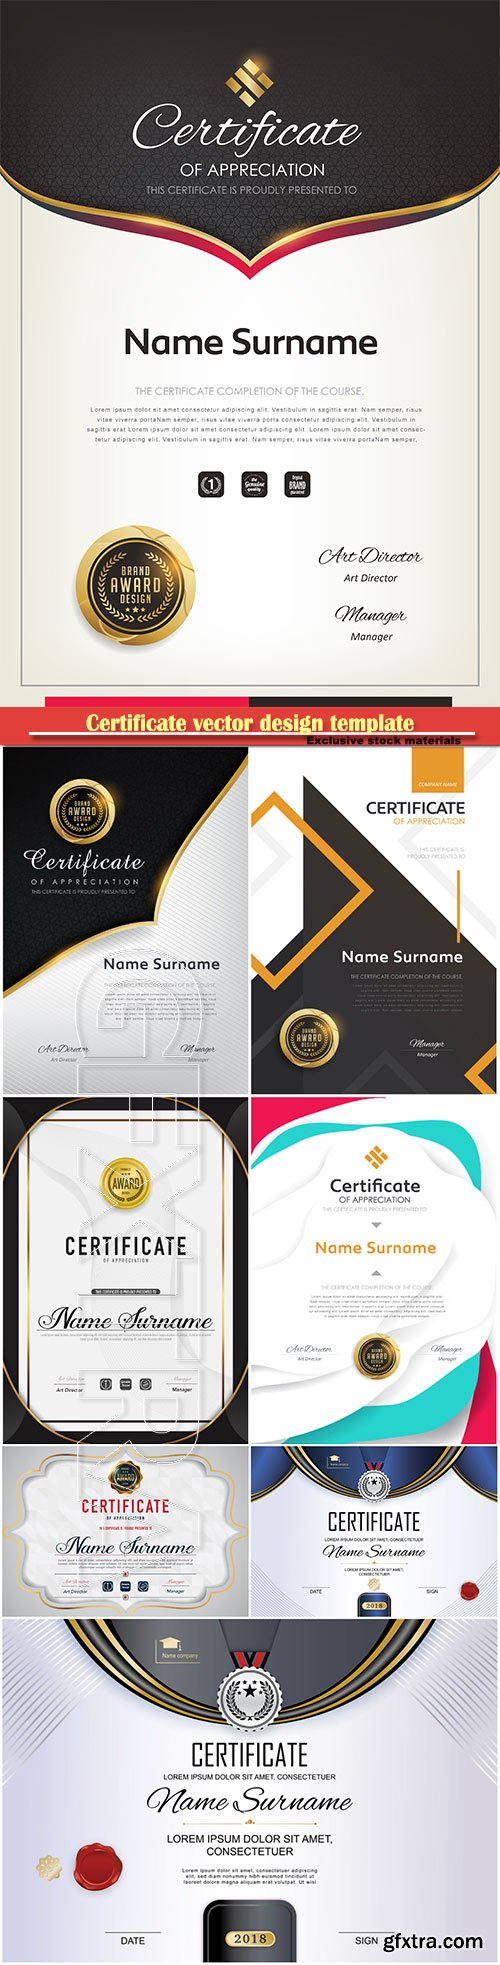 Certificate and vector diploma design template # 58